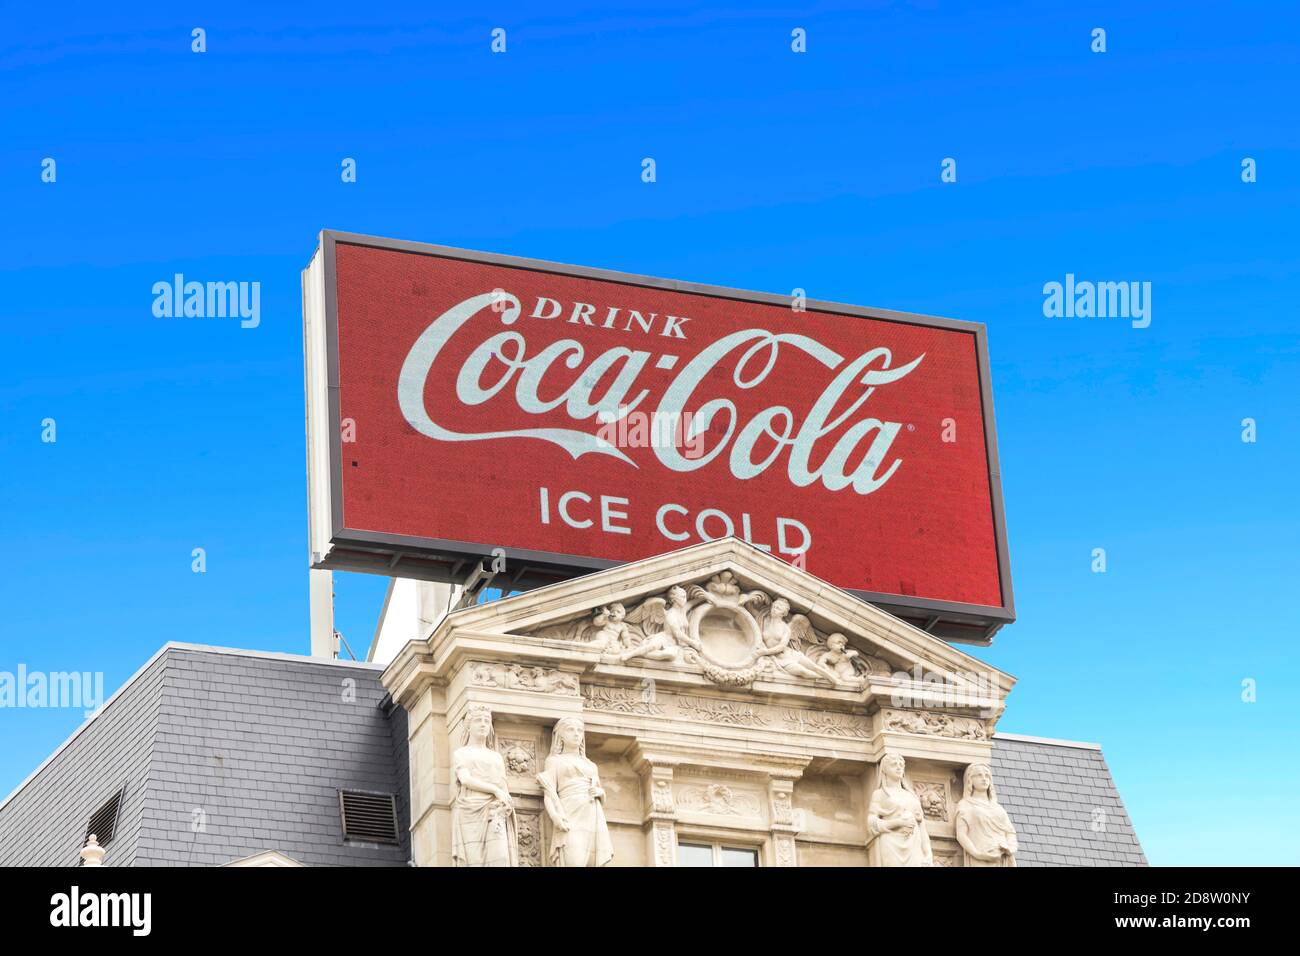 Brussels, BELGIUM - July 7, 2019: Large Coca Cola billboard on rooftop against sky, Coca-Cola advertising sign on rooftop. Stock Photo